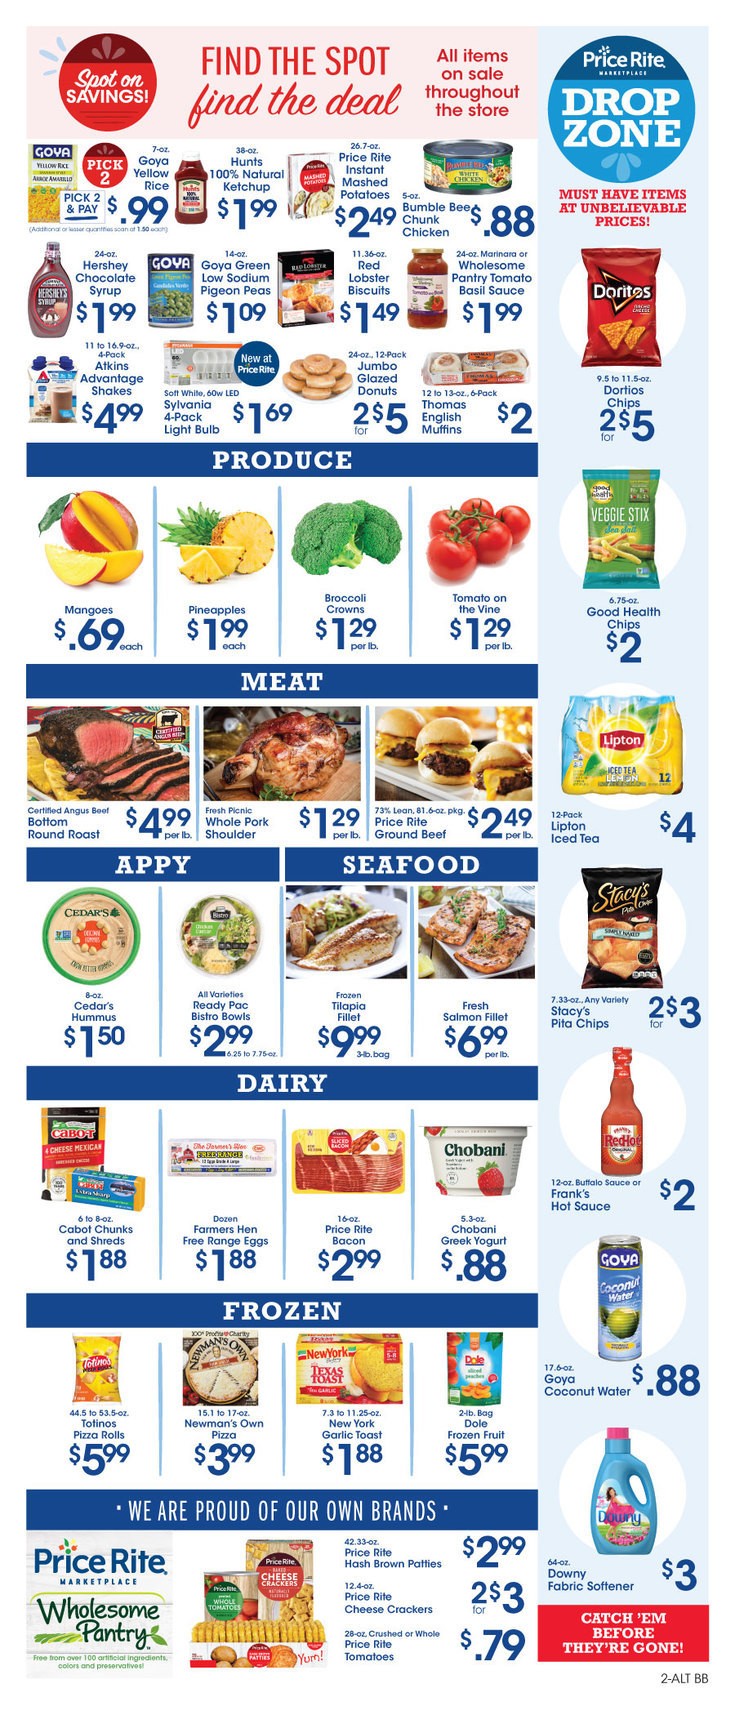 Price Rite Weekly Ad from January 10